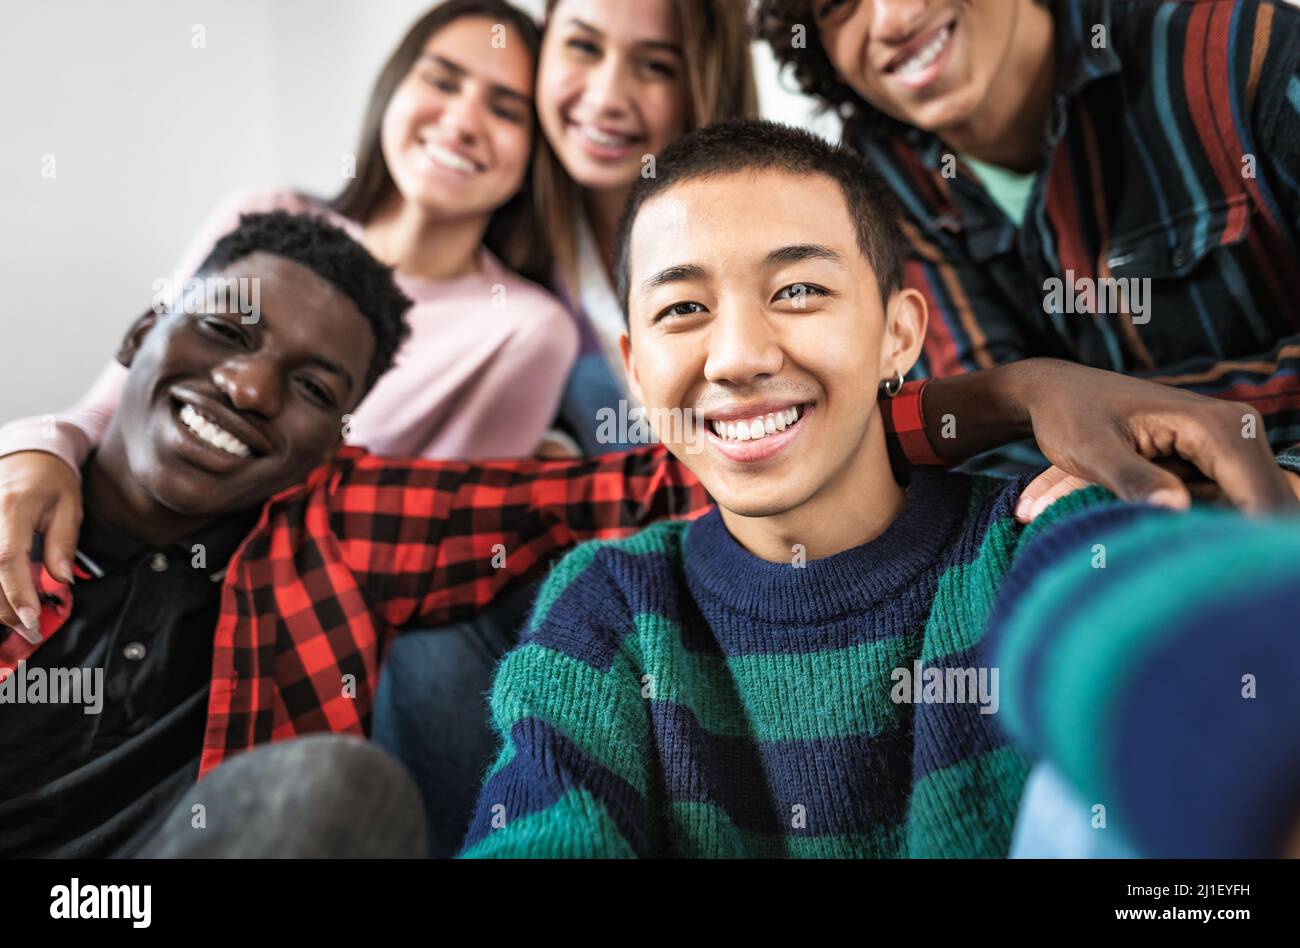 Young multiracial friends taking selfie together - Friendship and diversity concept Stock Photo